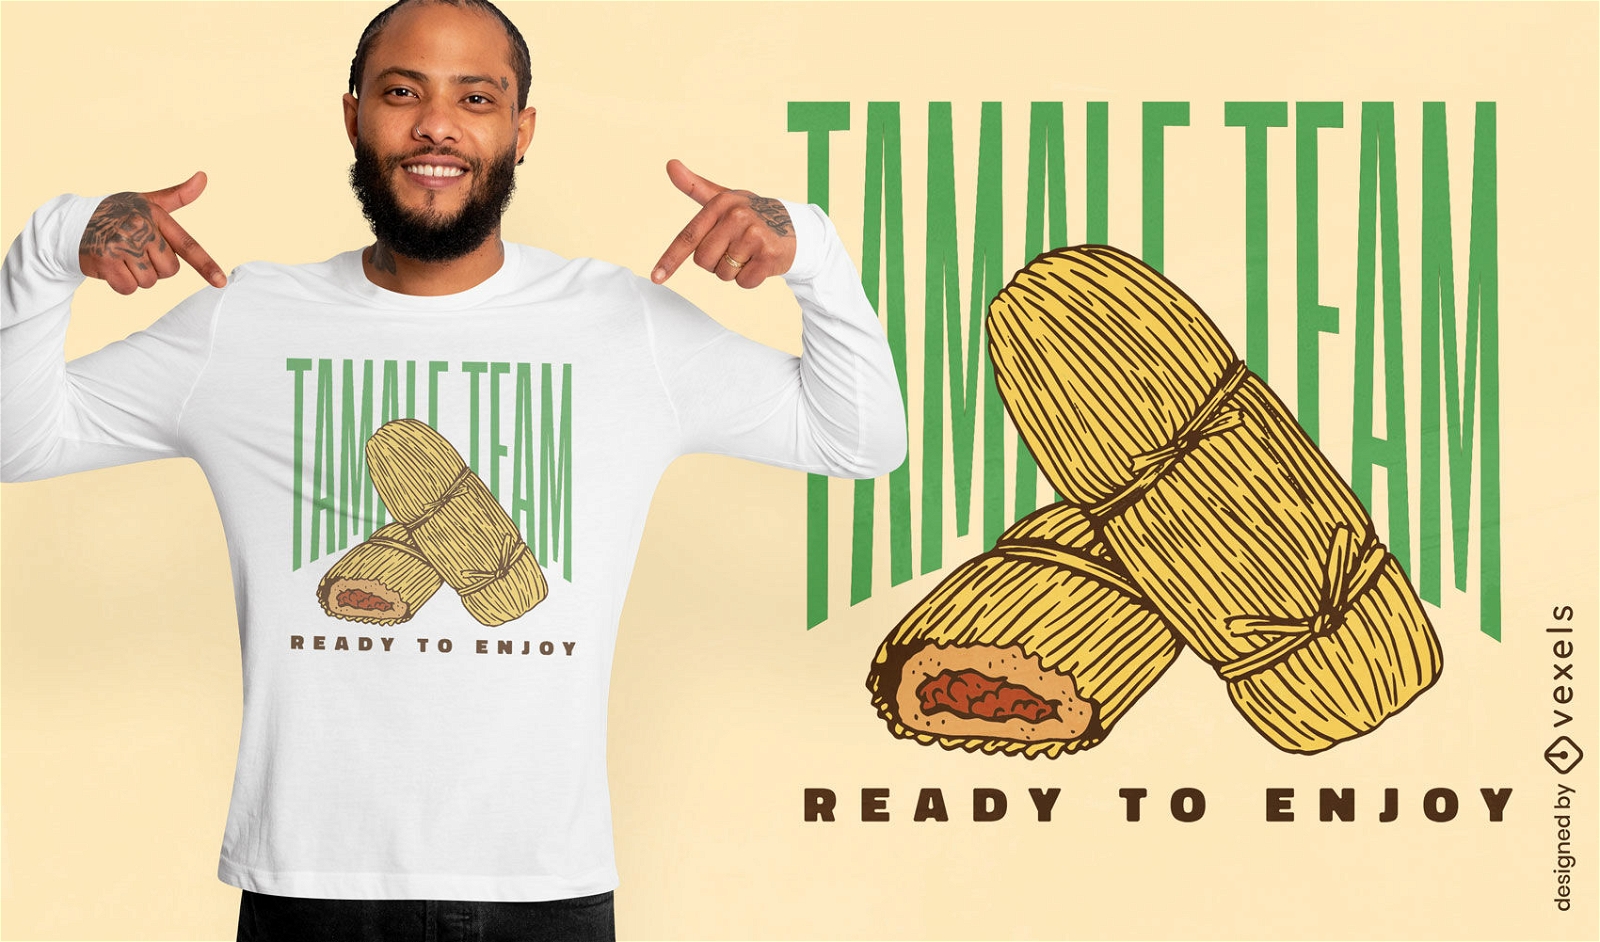 Tamale mexican food t-shirt design